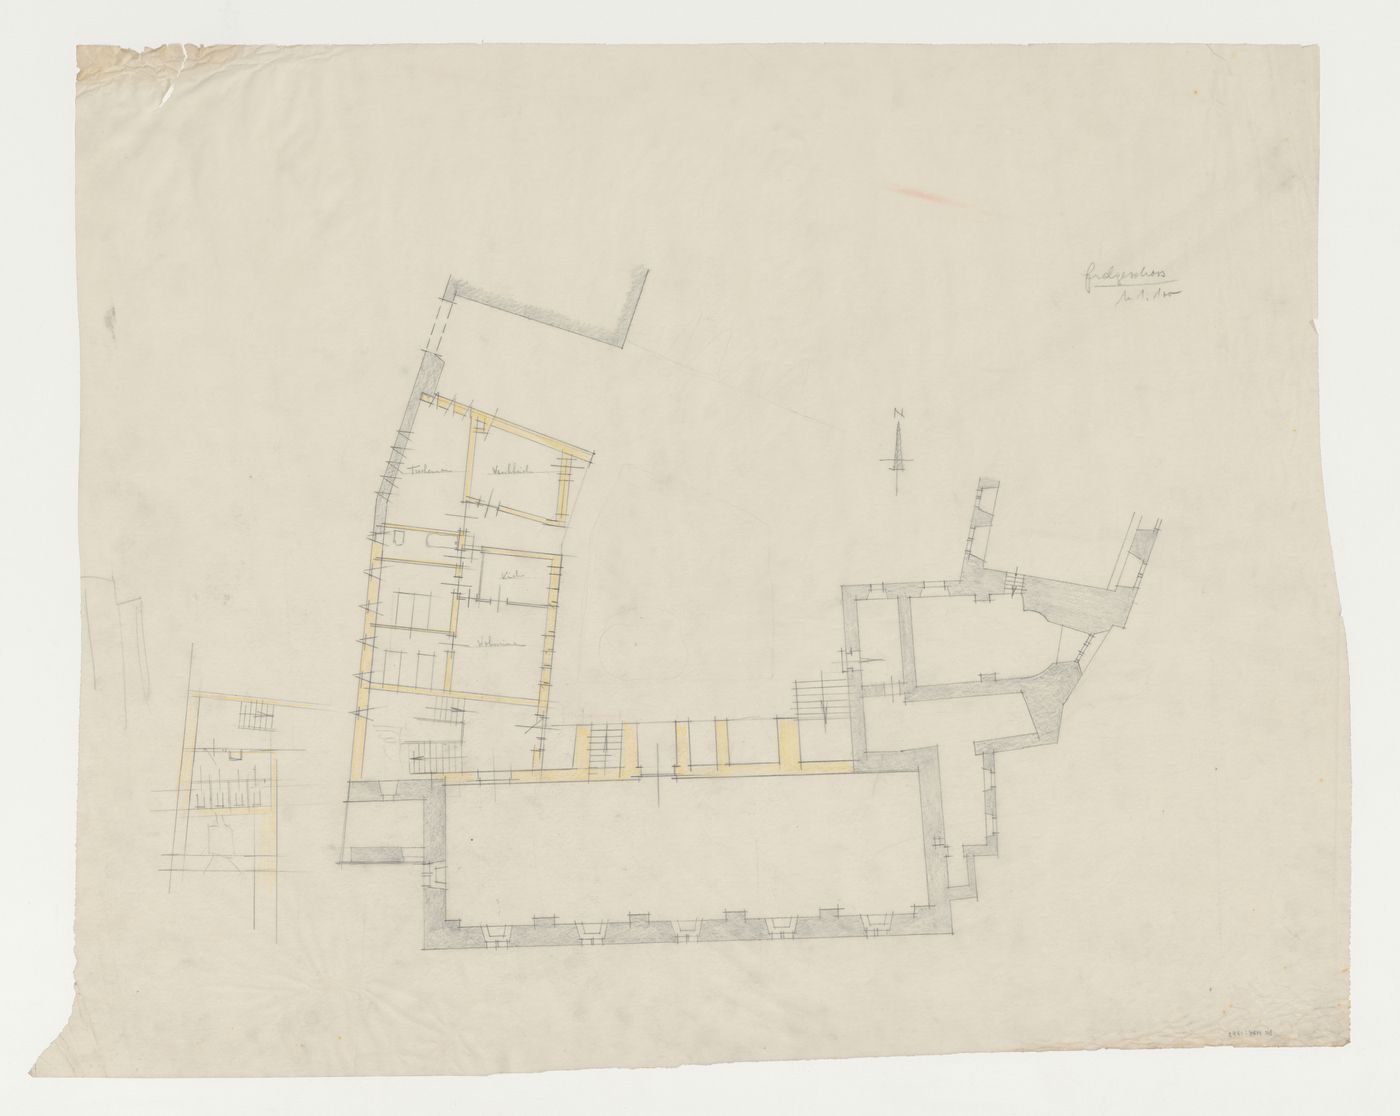 Ground floor plan for an addition to an existing building, possibly a school, Limburg an der Lahn, Germany